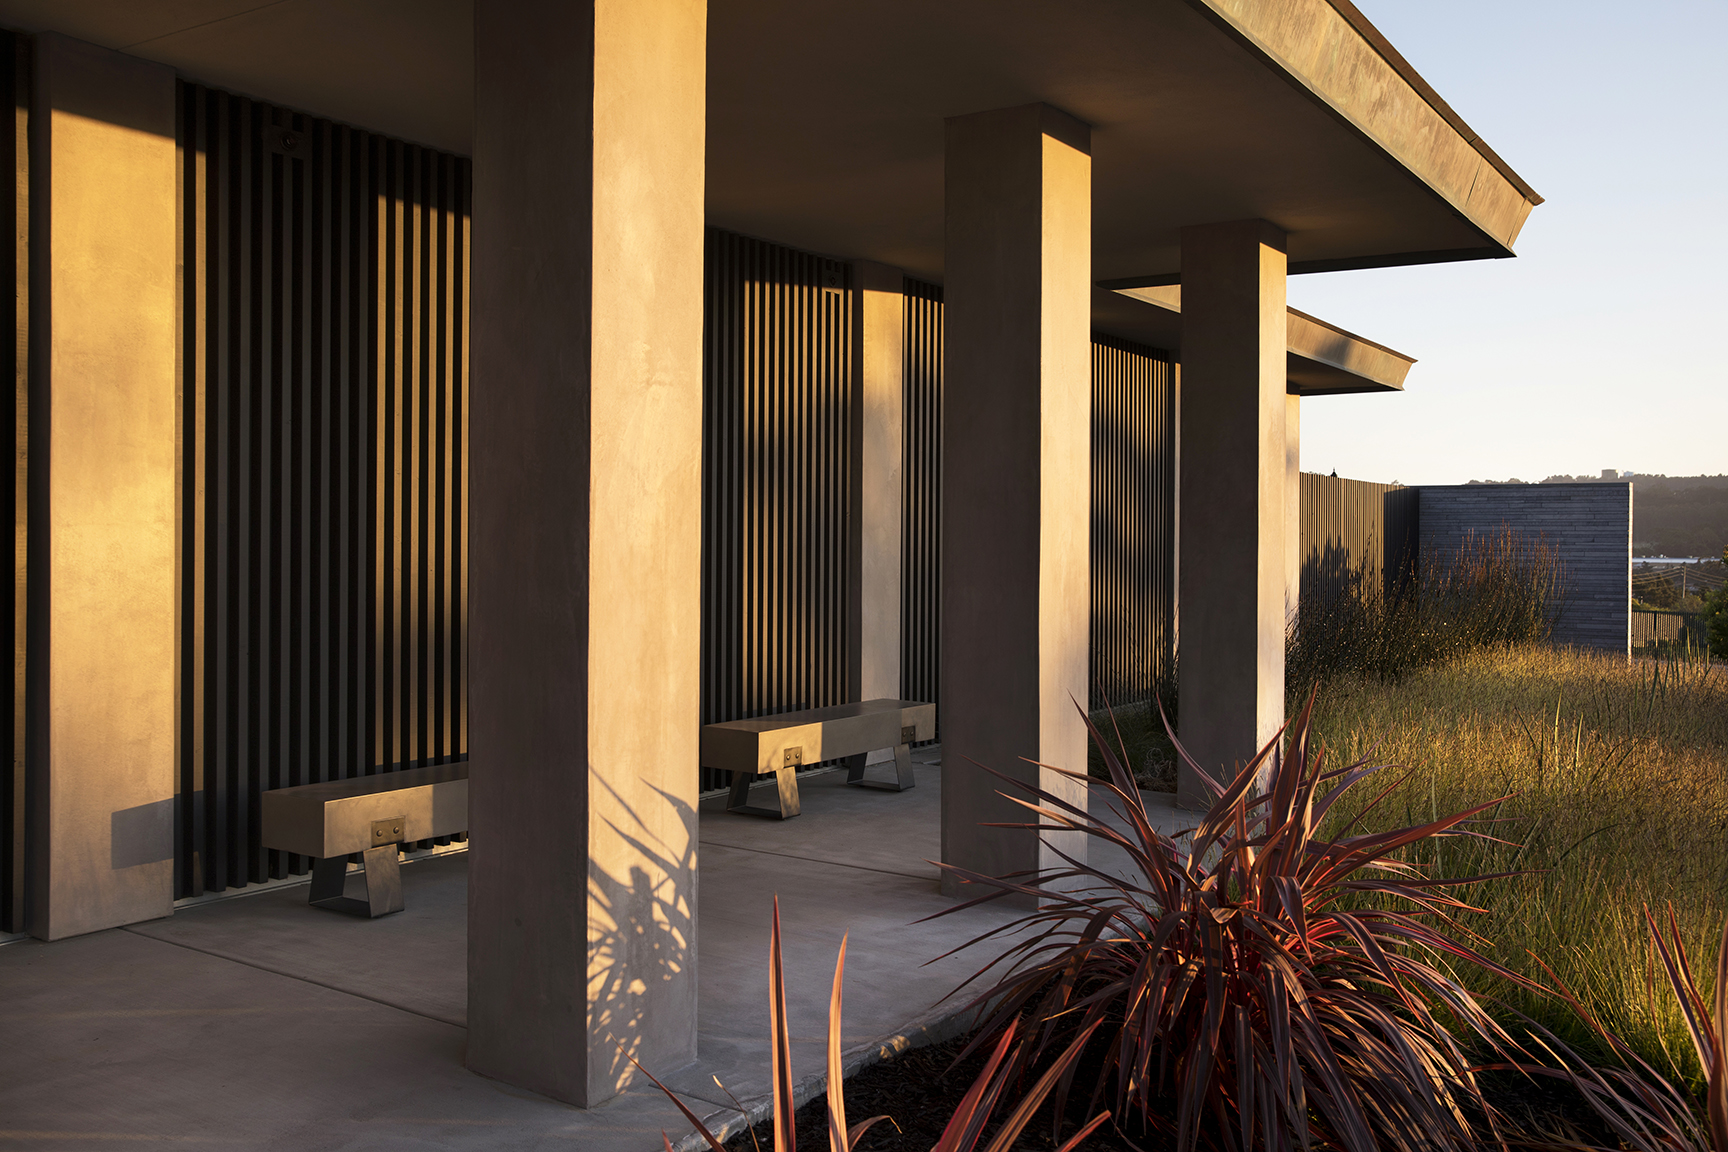 The walls and columns of the original 1960s structure, a midcentury modern, had been clad in aggregate stone.